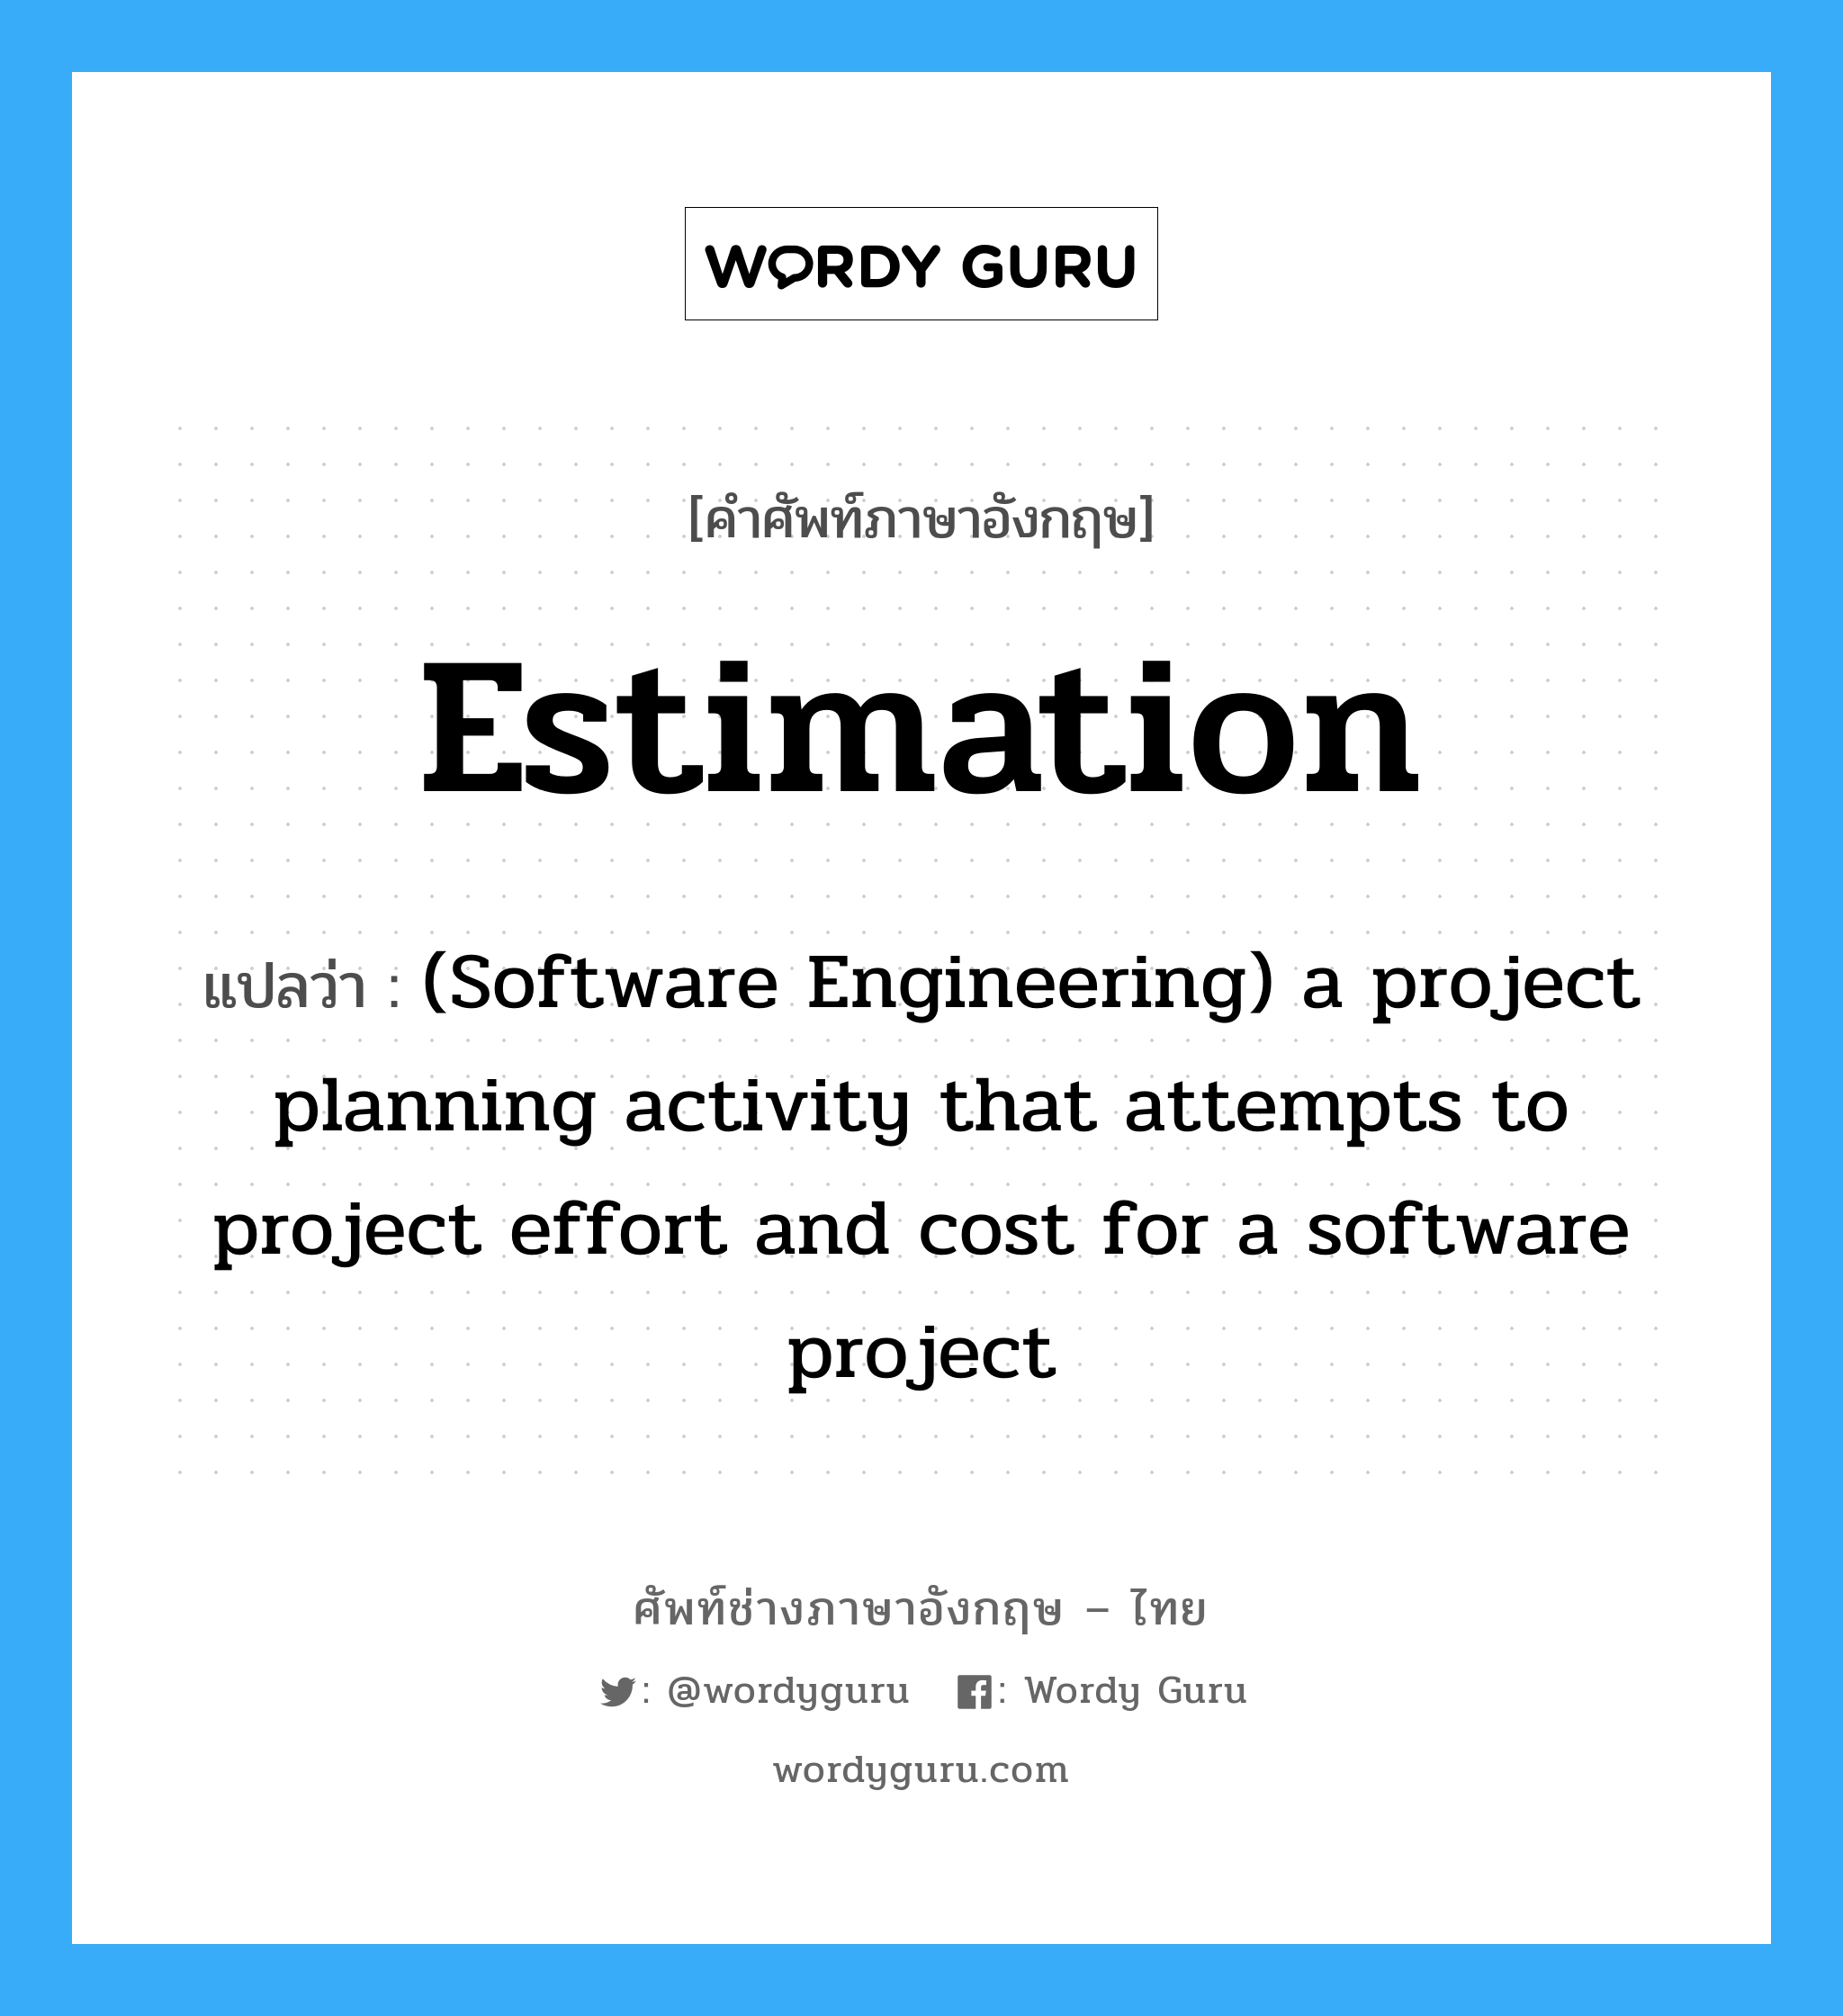 estimation แปลว่า?, คำศัพท์ช่างภาษาอังกฤษ - ไทย Estimation คำศัพท์ภาษาอังกฤษ Estimation แปลว่า (Software Engineering) a project planning activity that attempts to project effort and cost for a software project